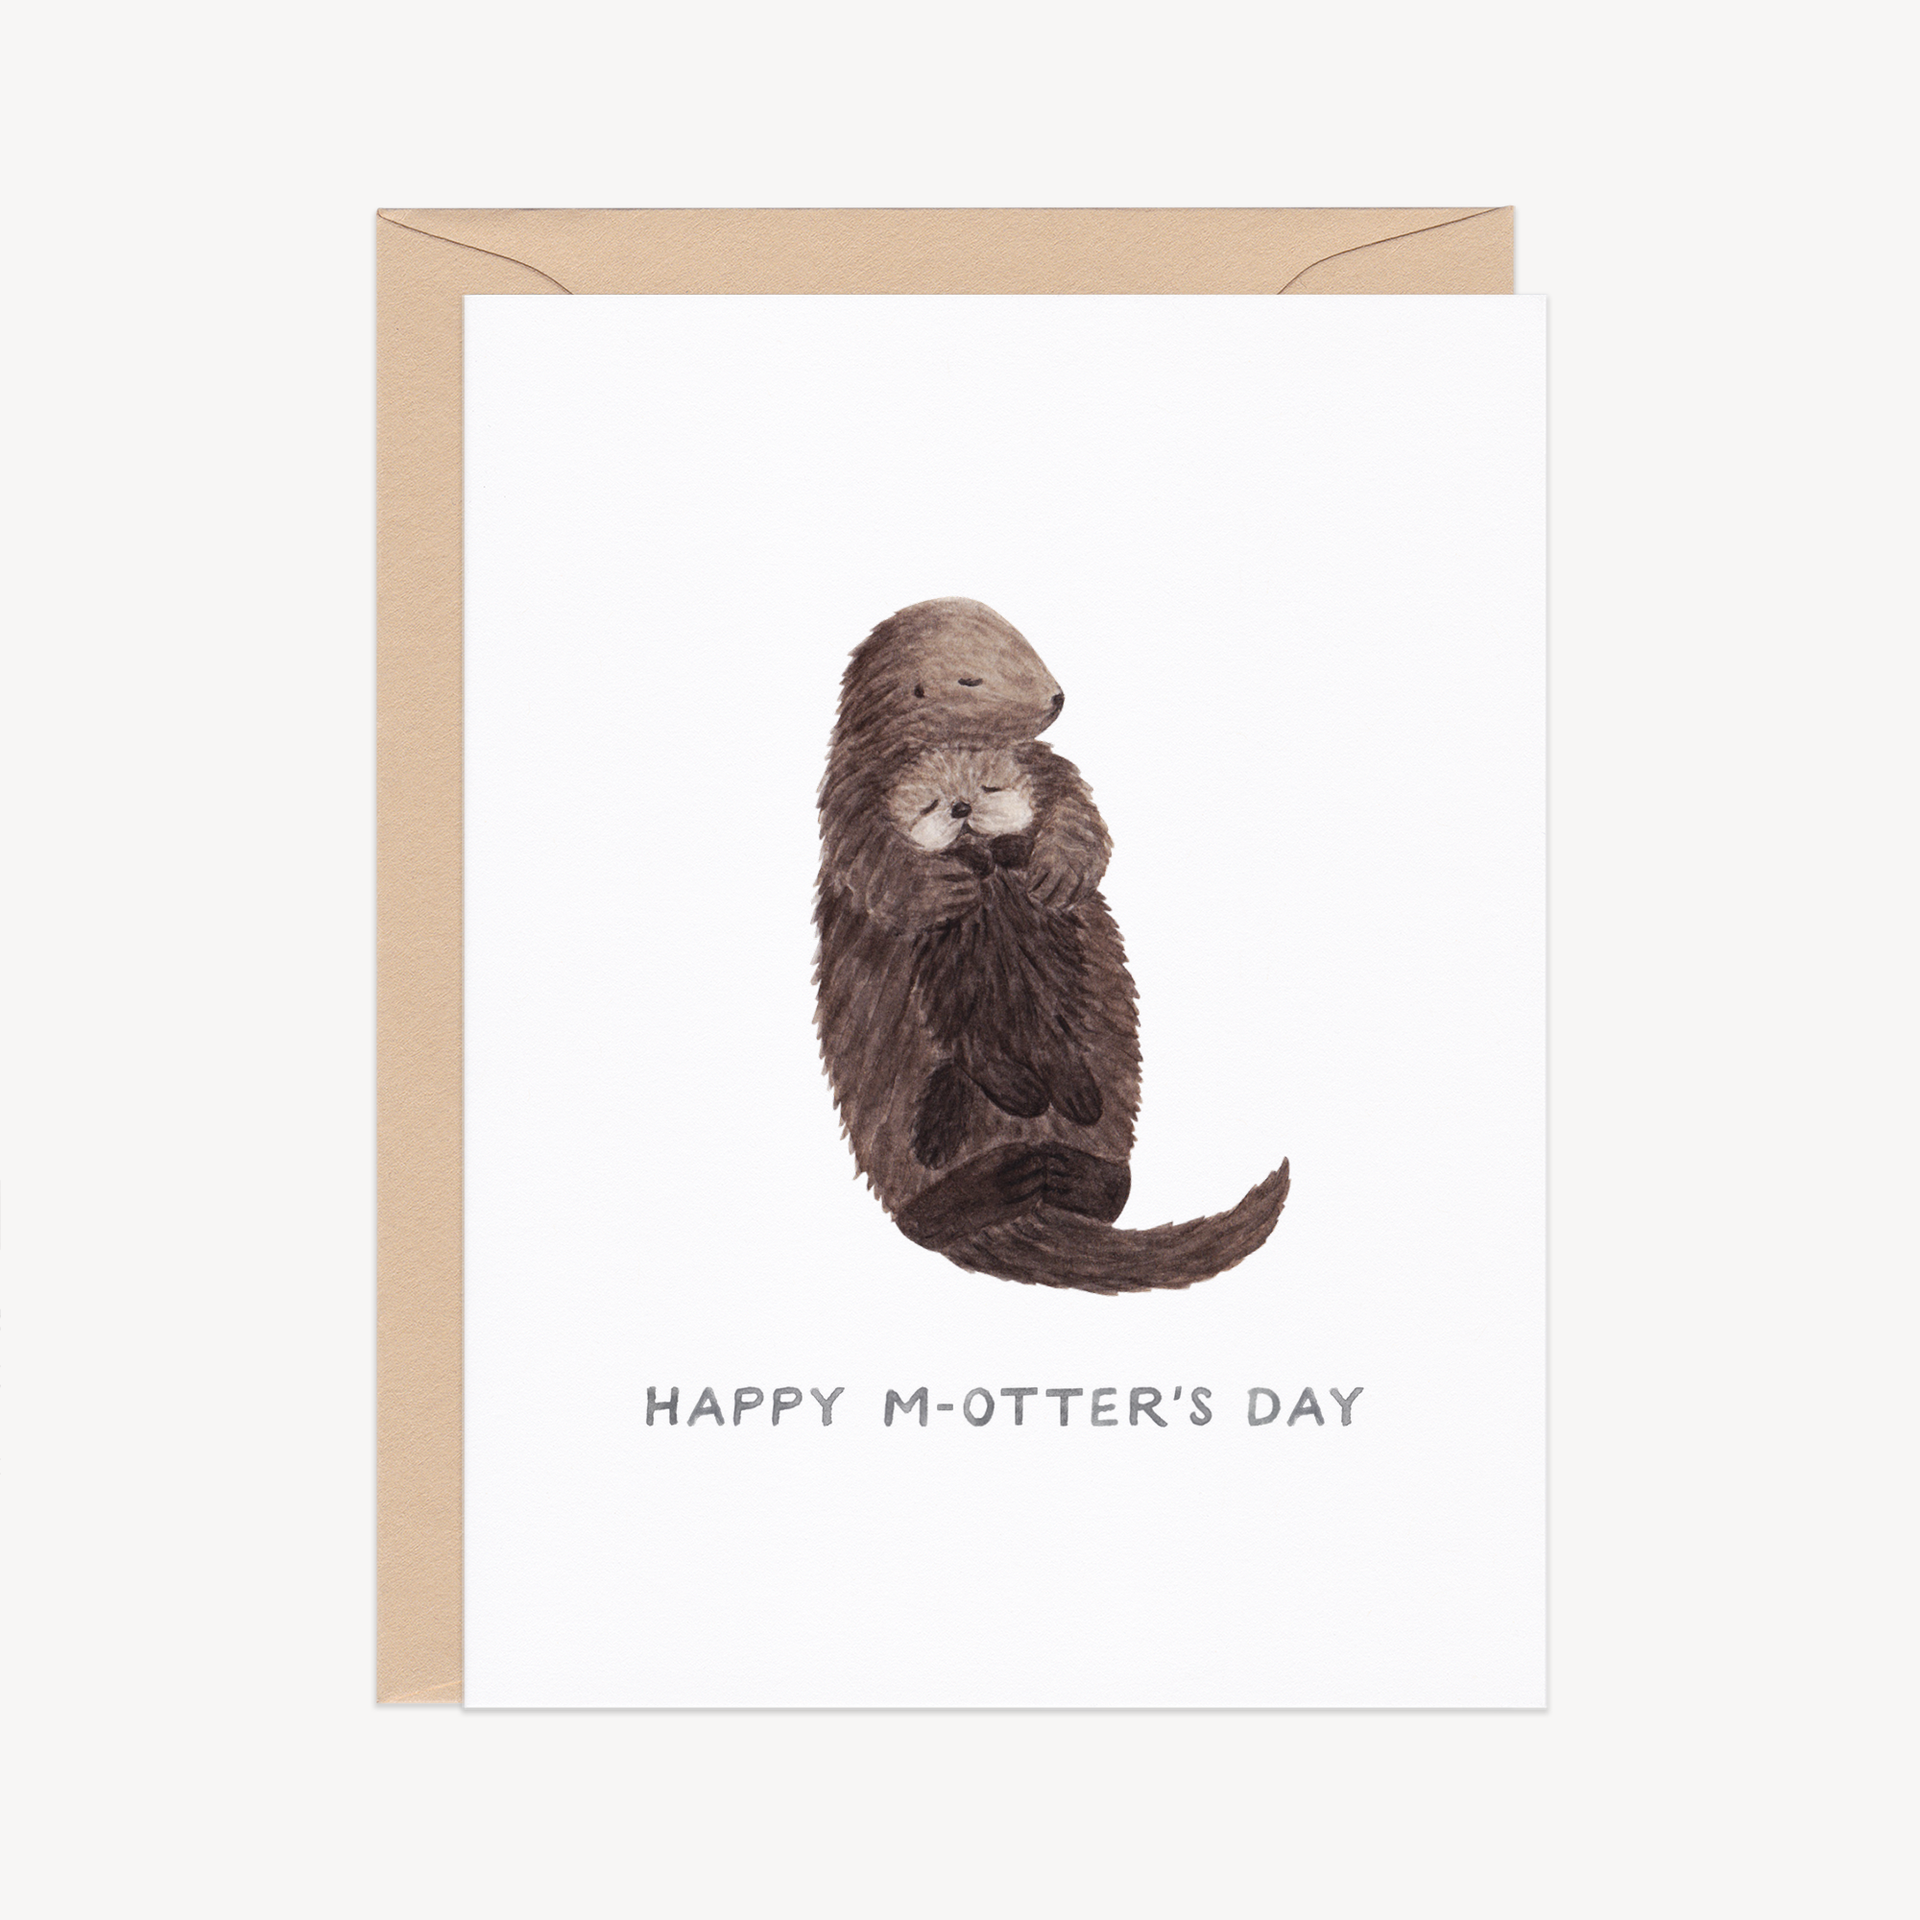 Significant Otter Love & Friendship Card